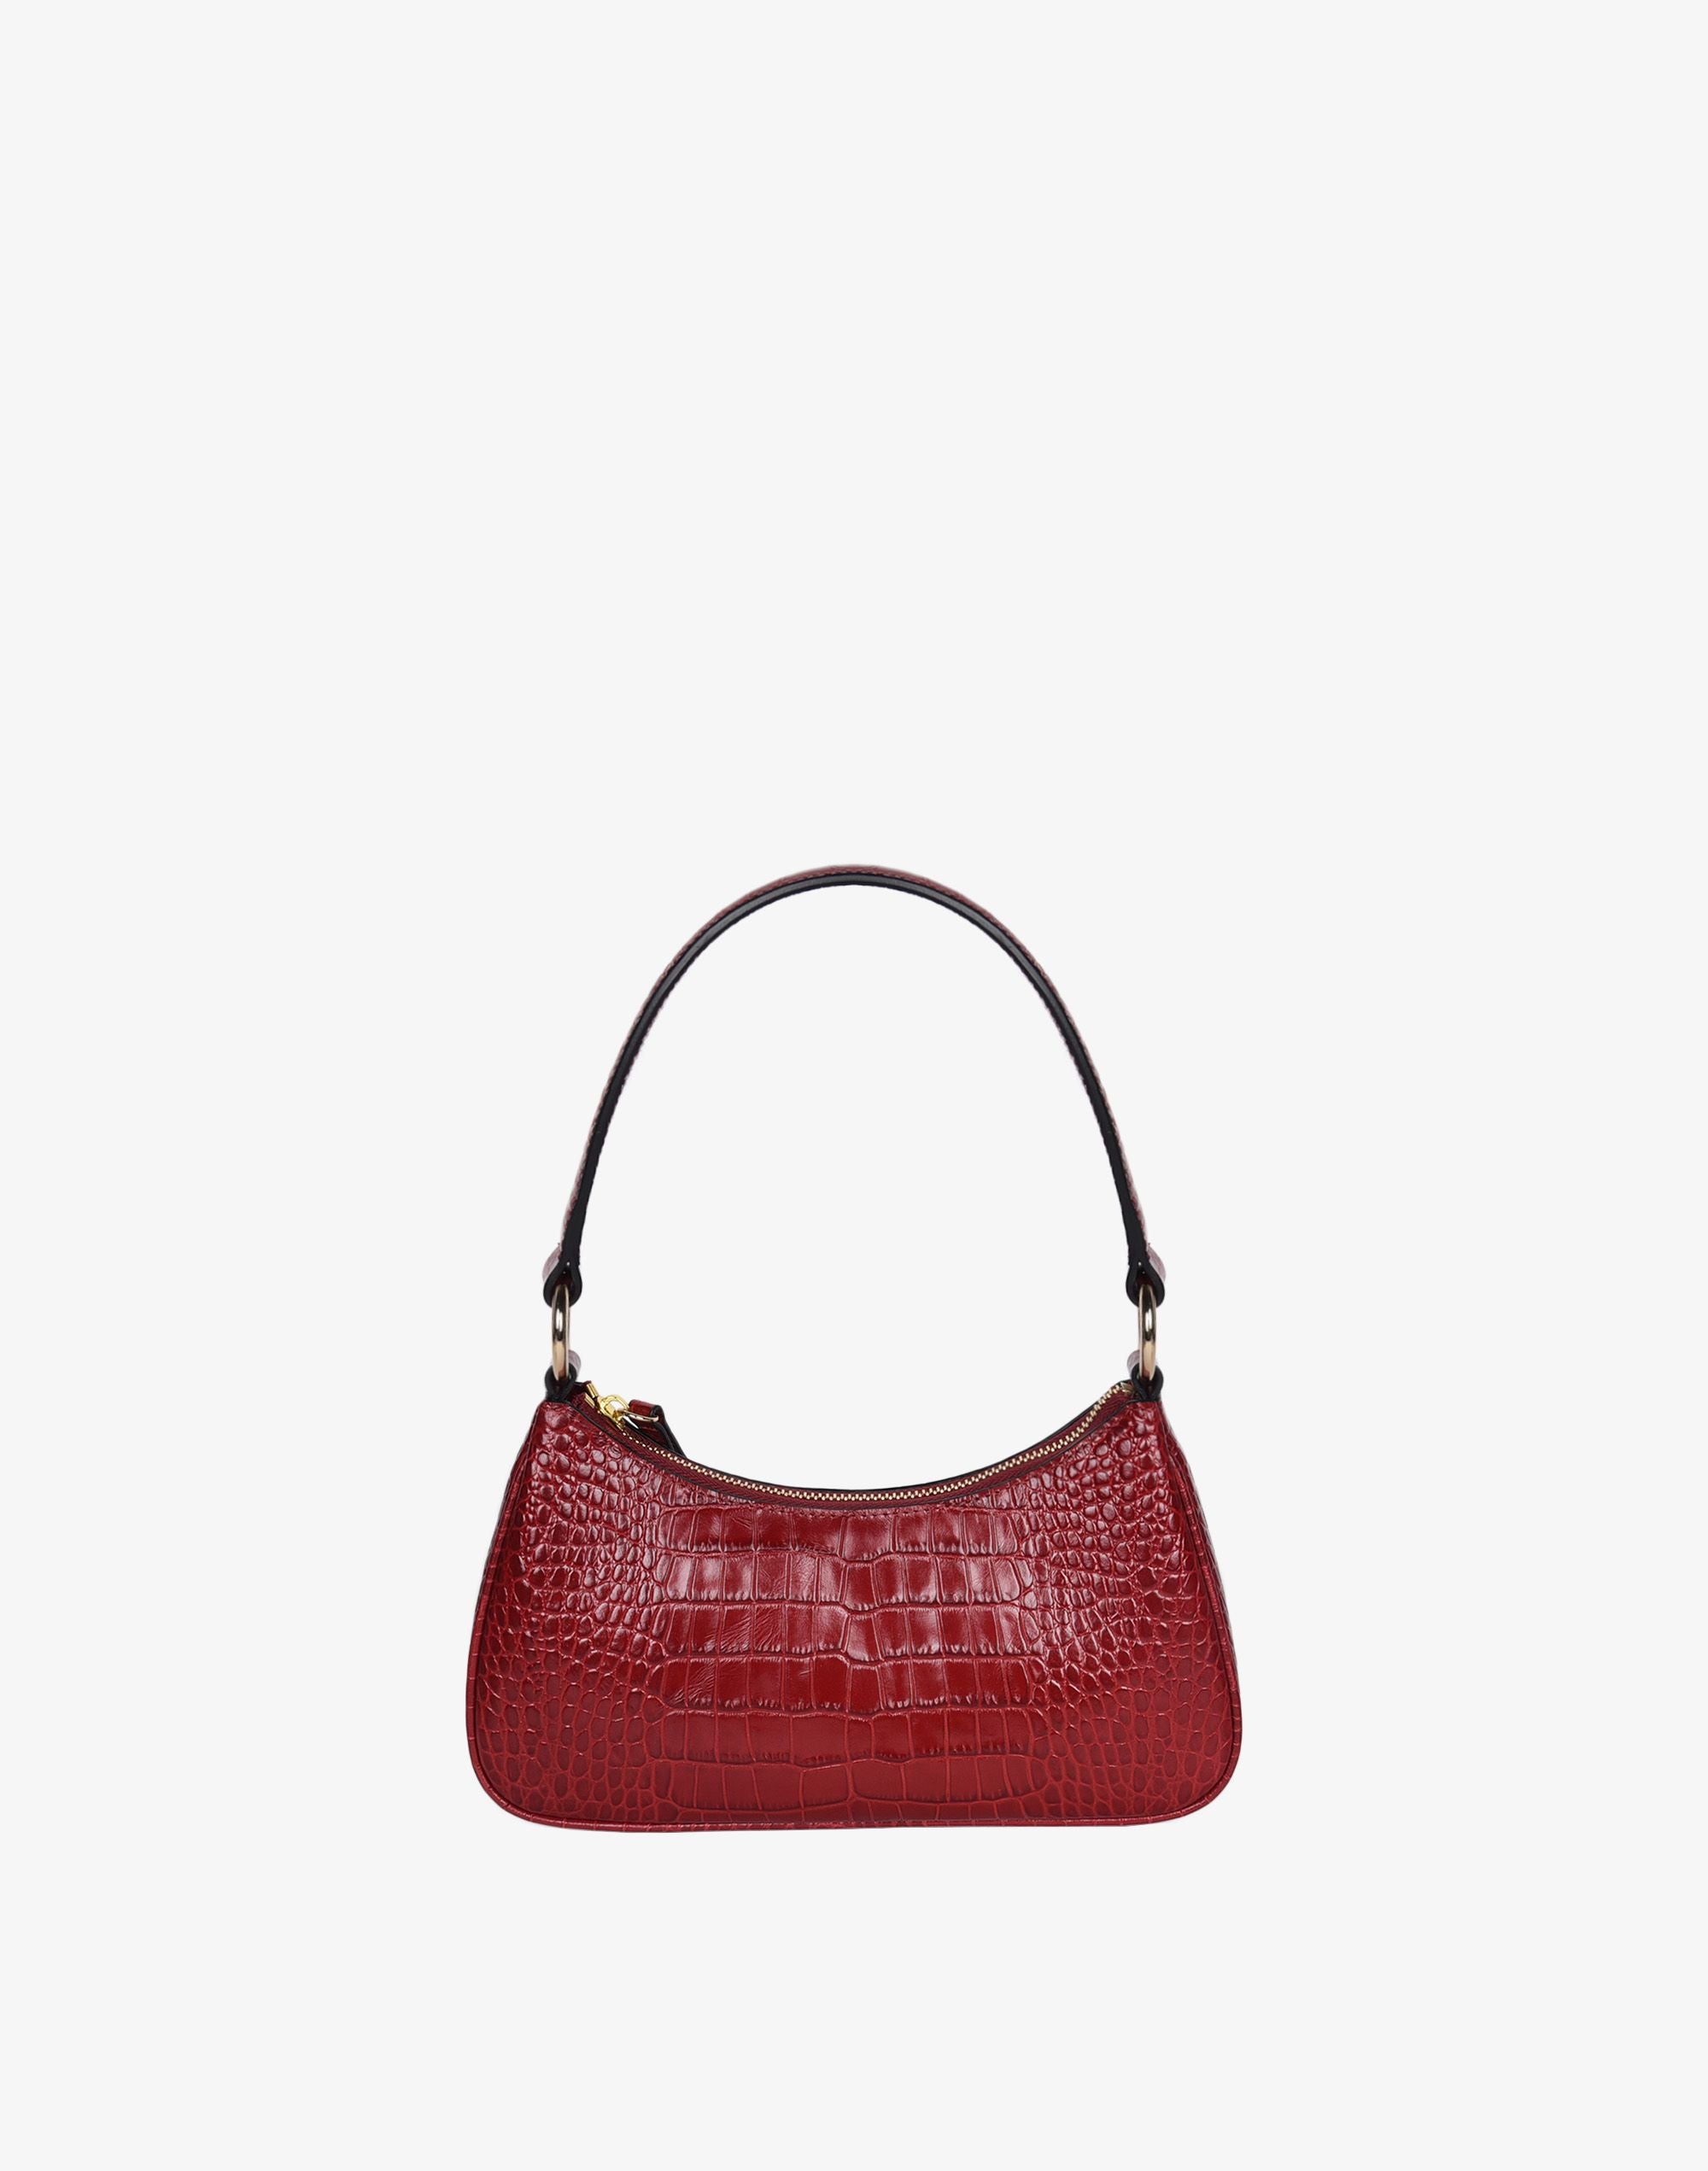 Premium Photo | A red crocodile handbag with gold buckles and a gold buckle.